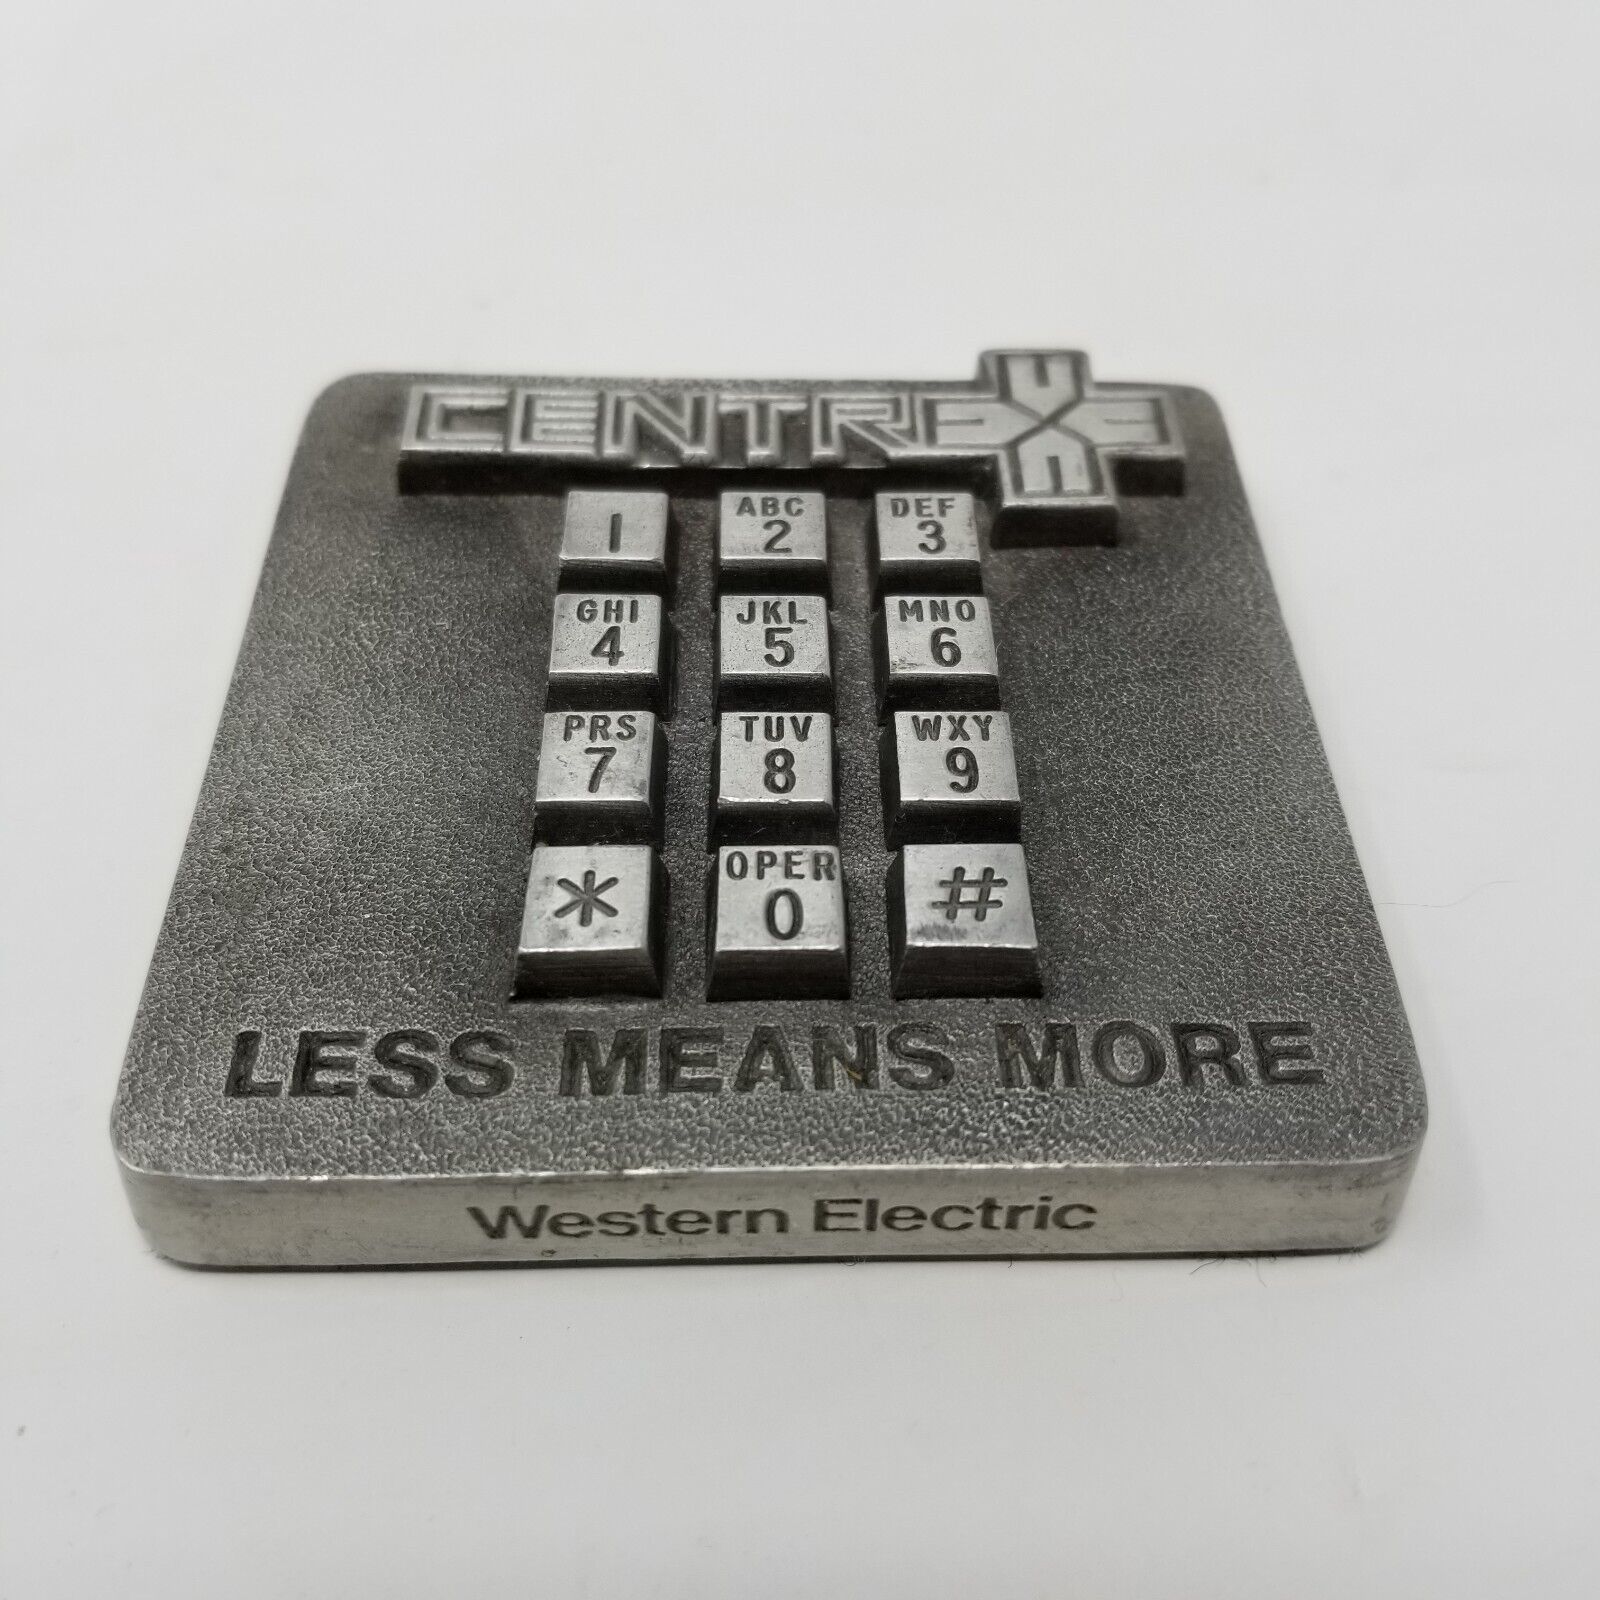 Centrex Western Electric Telephone Key Pad Paper Weight Less Means More